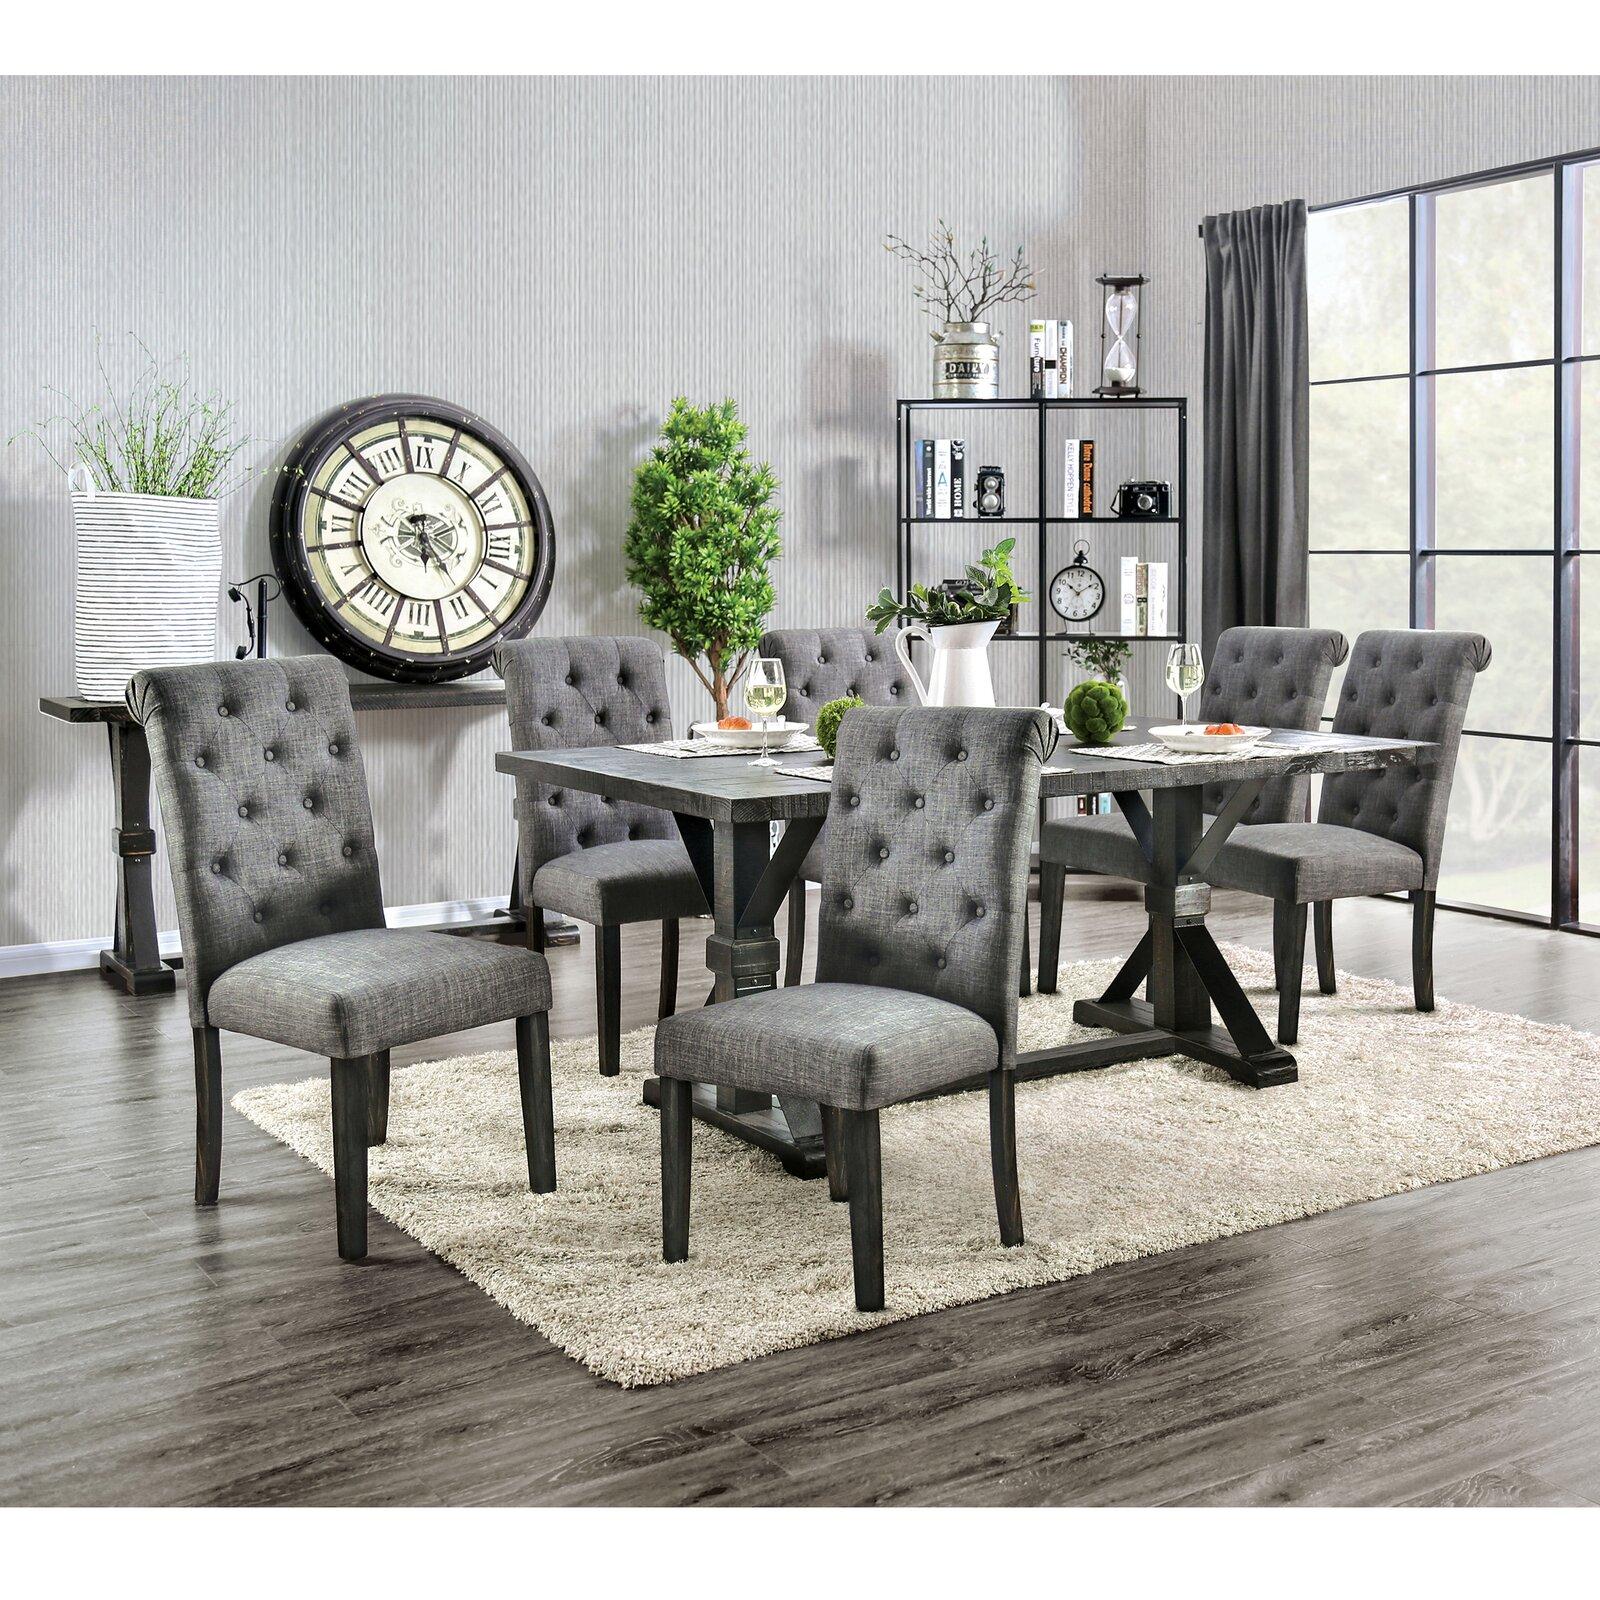 Rustic Dining Table Set CM3735T-Set-5 Alfred CM3735T-5PC in Antique Black, Gray Fabric